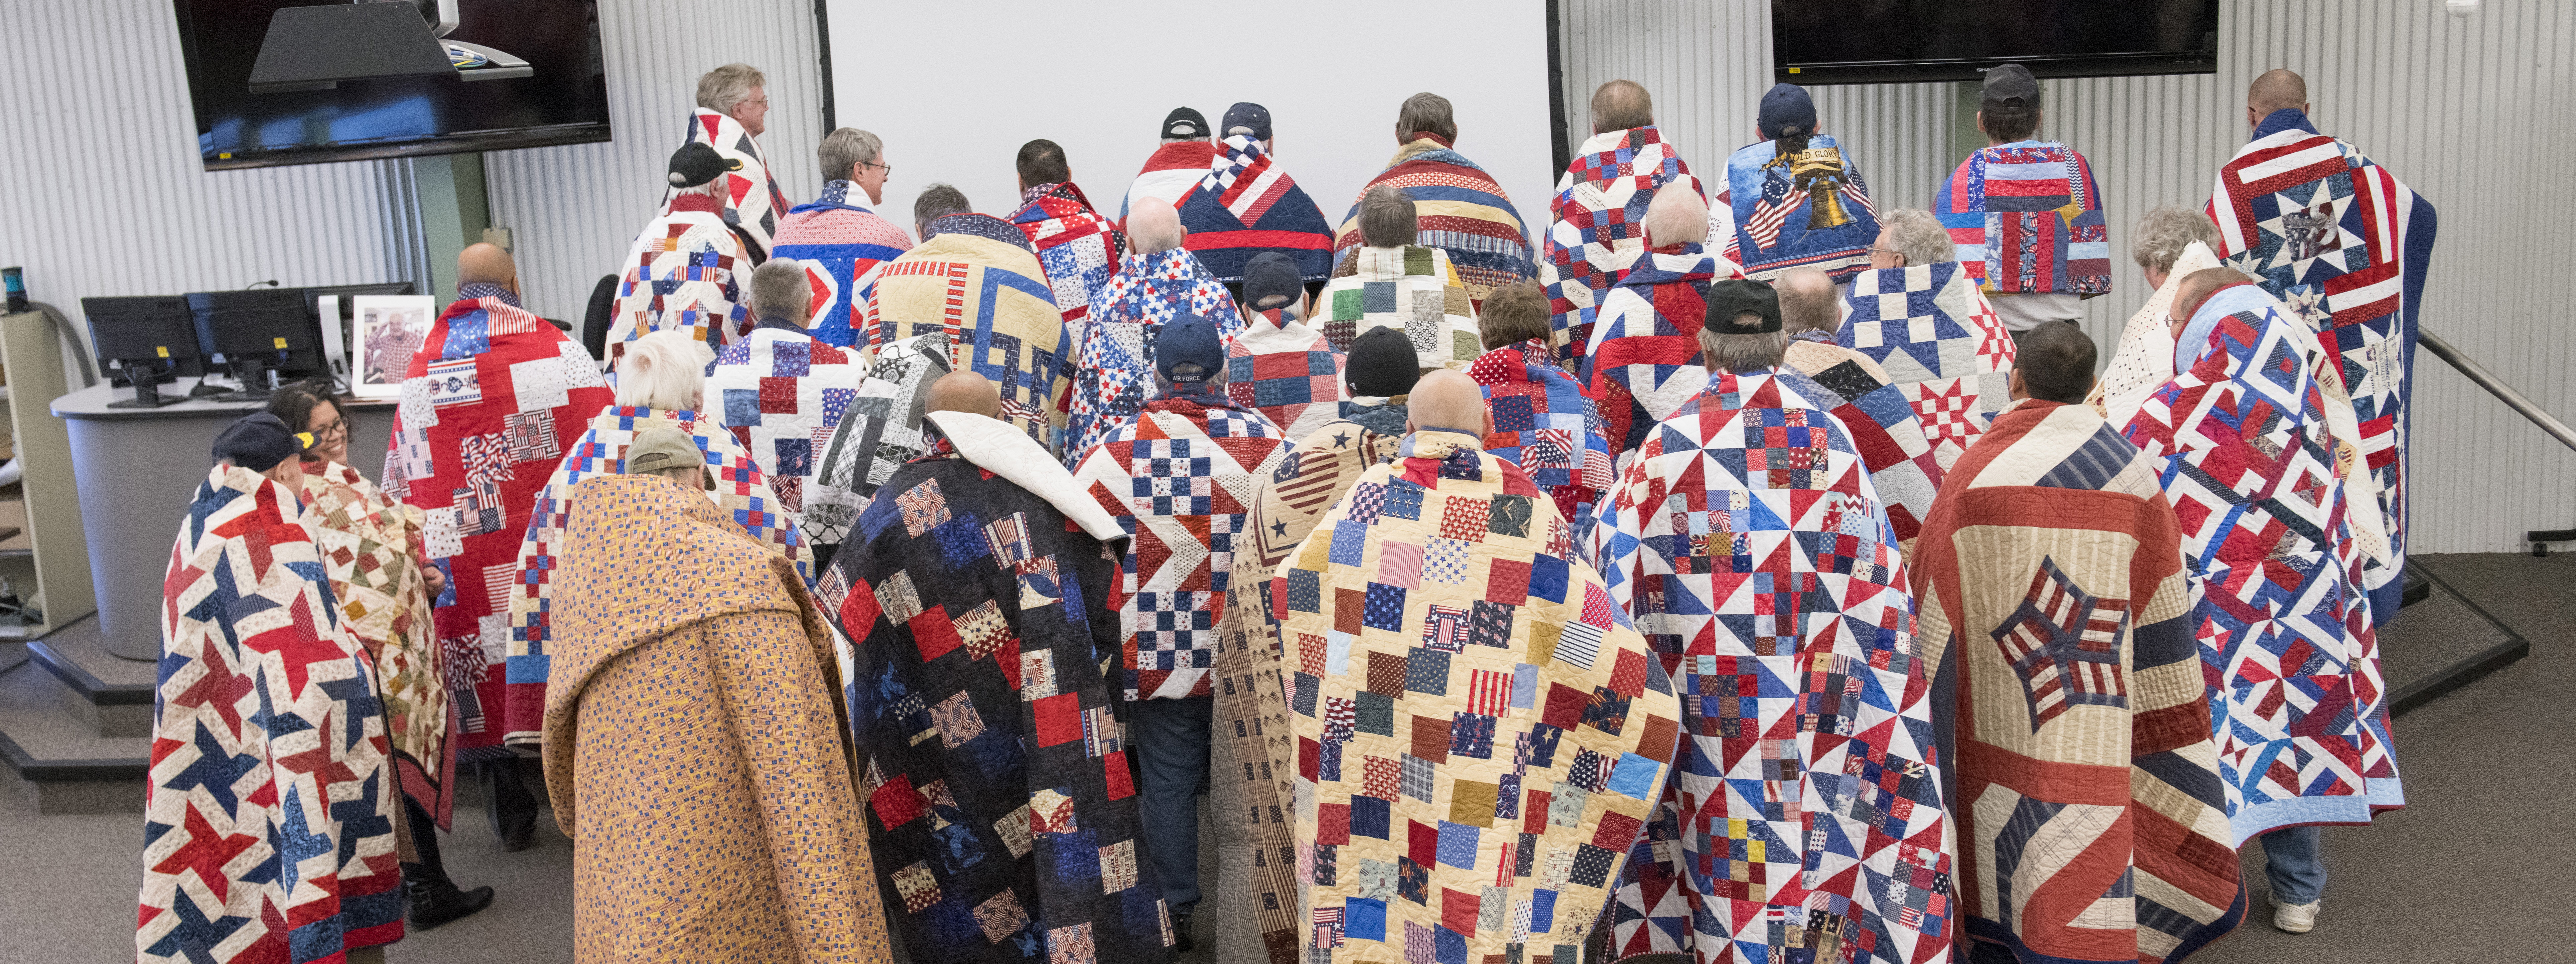 50 Quilts for 50 Fermi-veterans. Special thanks to the Quilts of Valor Foundation! November 9, 2018 | Photo: Reidar Hahn